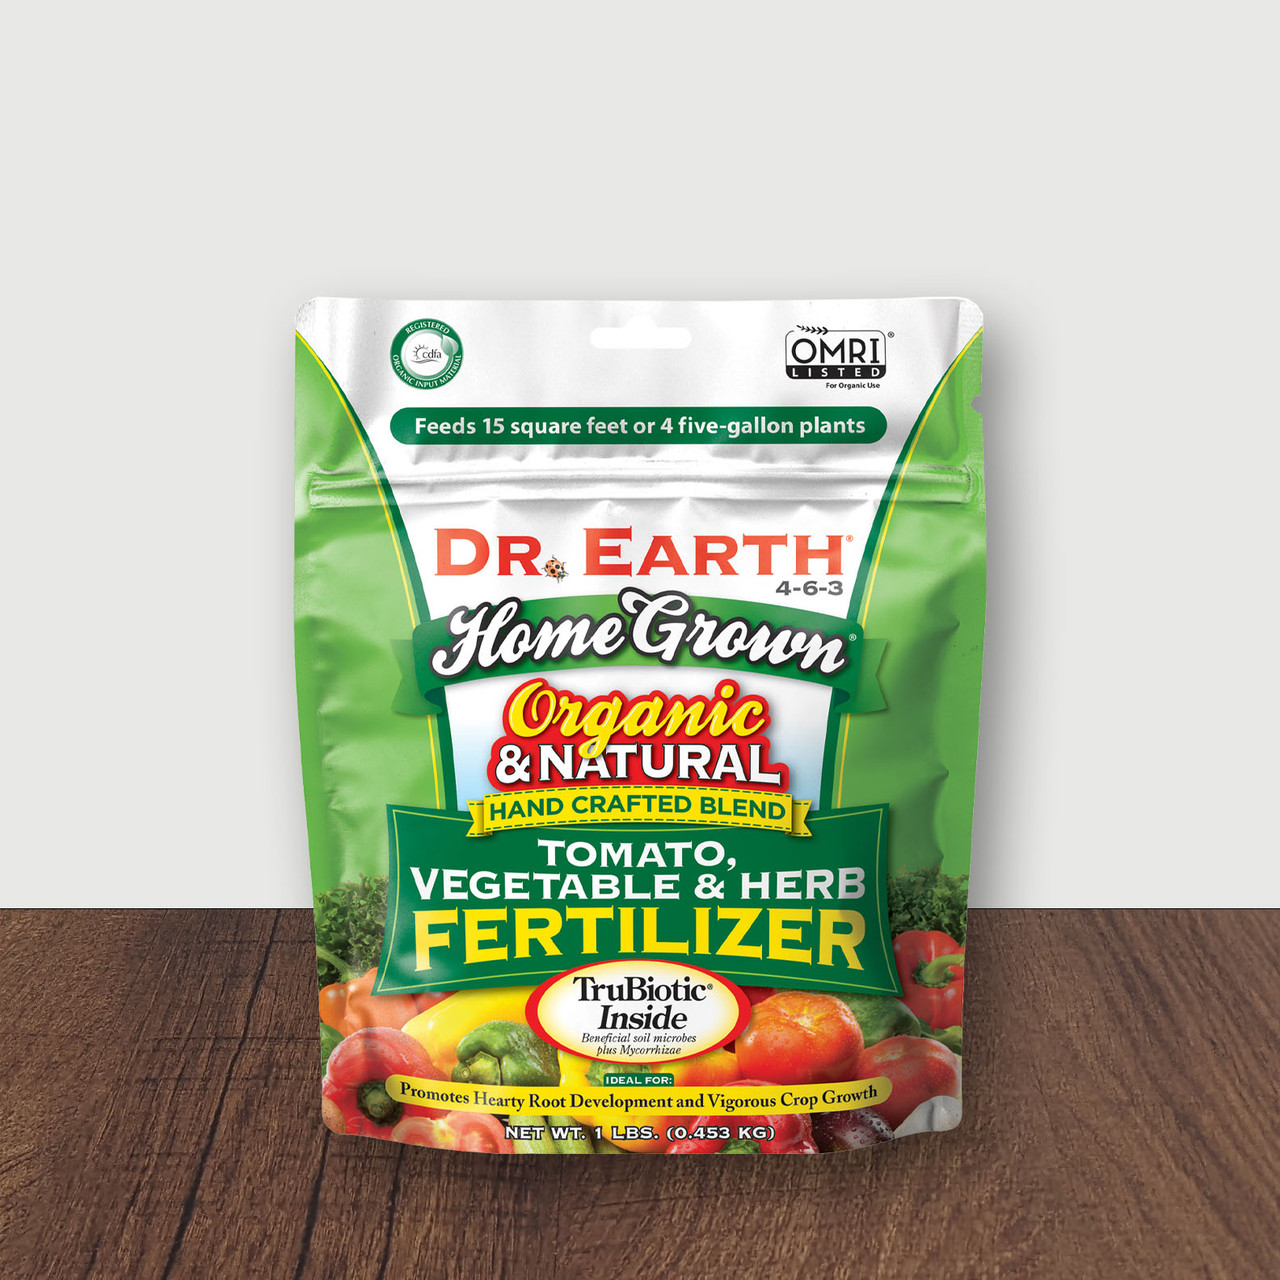 How To Use Dr Earth Fertilizer